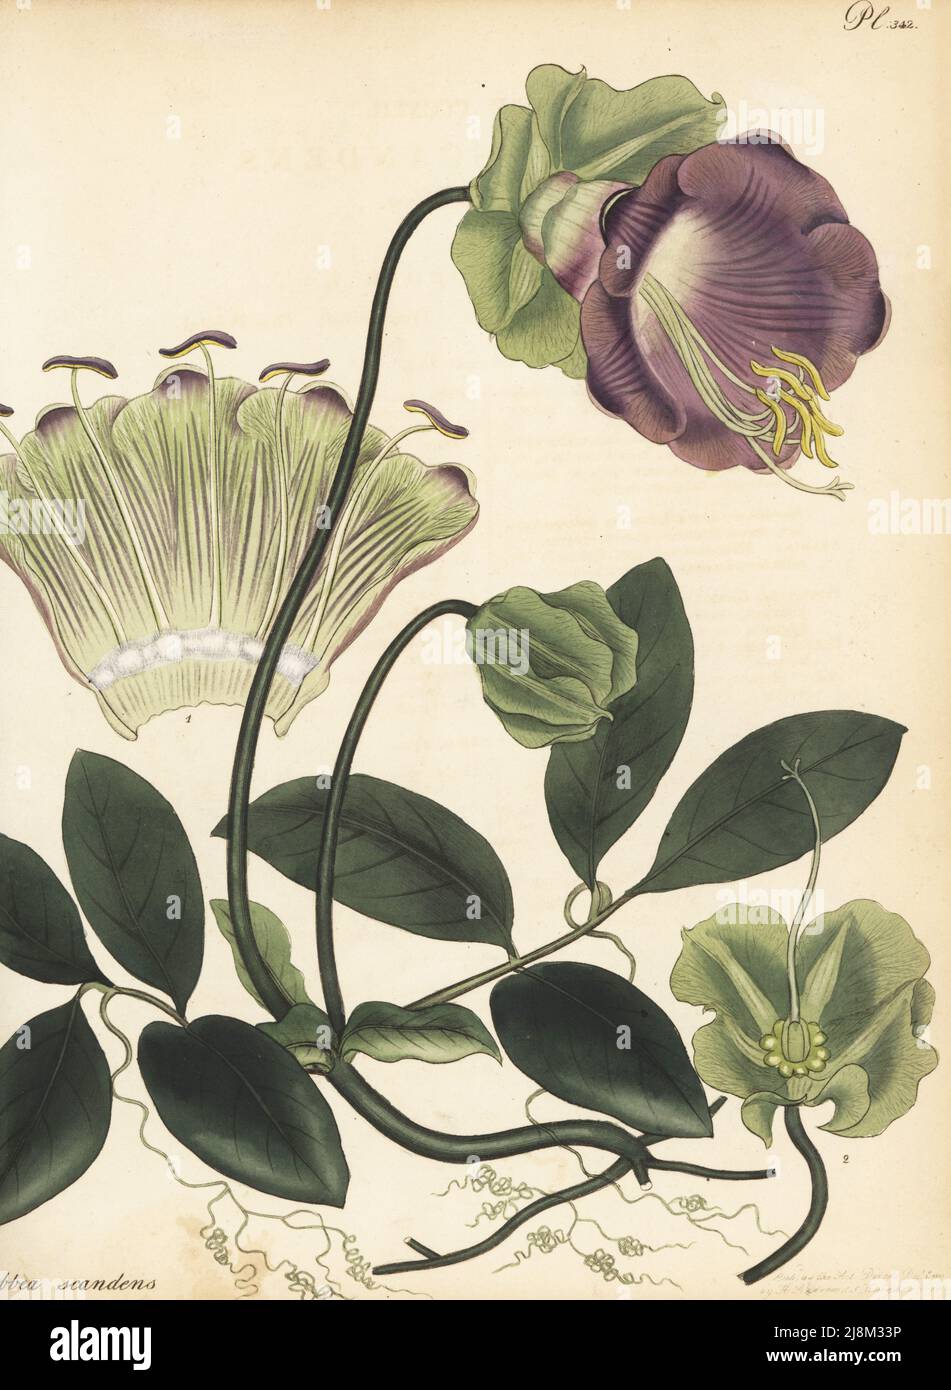 Cup-and-saucer vine, cathedral bells, Mexican ivy, or monastery bells, Cobaea scandens. Climbing cobbea, Cobbea scandens. Native to Mexico, in the collection of Charles Long and Amelia Hume, Bromley Hill. Copperplate engraving drawn, engraved and hand-coloured by Henry Andrews from his Botanical Register, Volume 5, self-published in Knightsbridge, London, 1803. Stock Photo